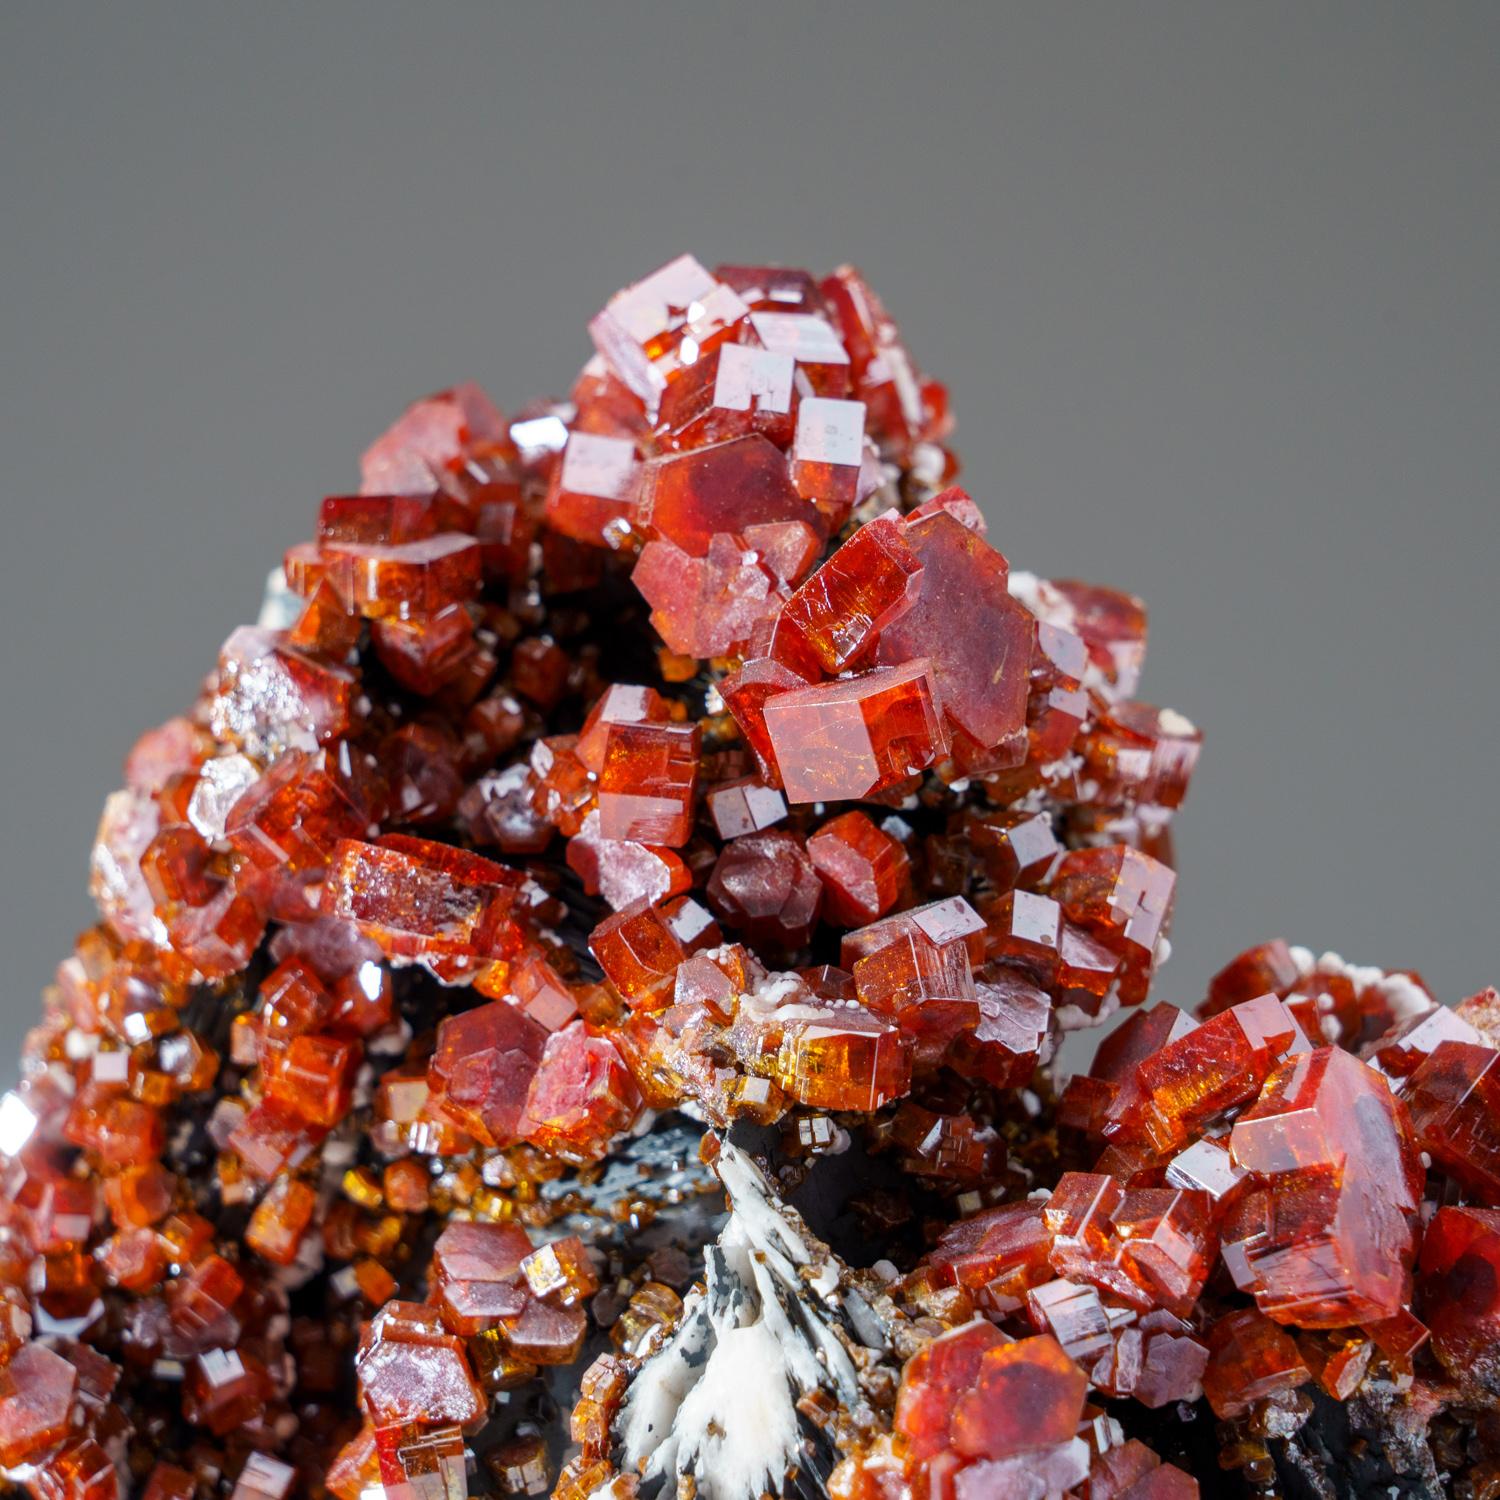 From Mibladen, Atlas Mountains, Khénifra Province, Morocco 

Here is an exceptional world class specimen of lustrous crystal luster of red-orange vanadinite crystals covering all sides of matrix. The vanadinite crystals are hexagonal, translucent,